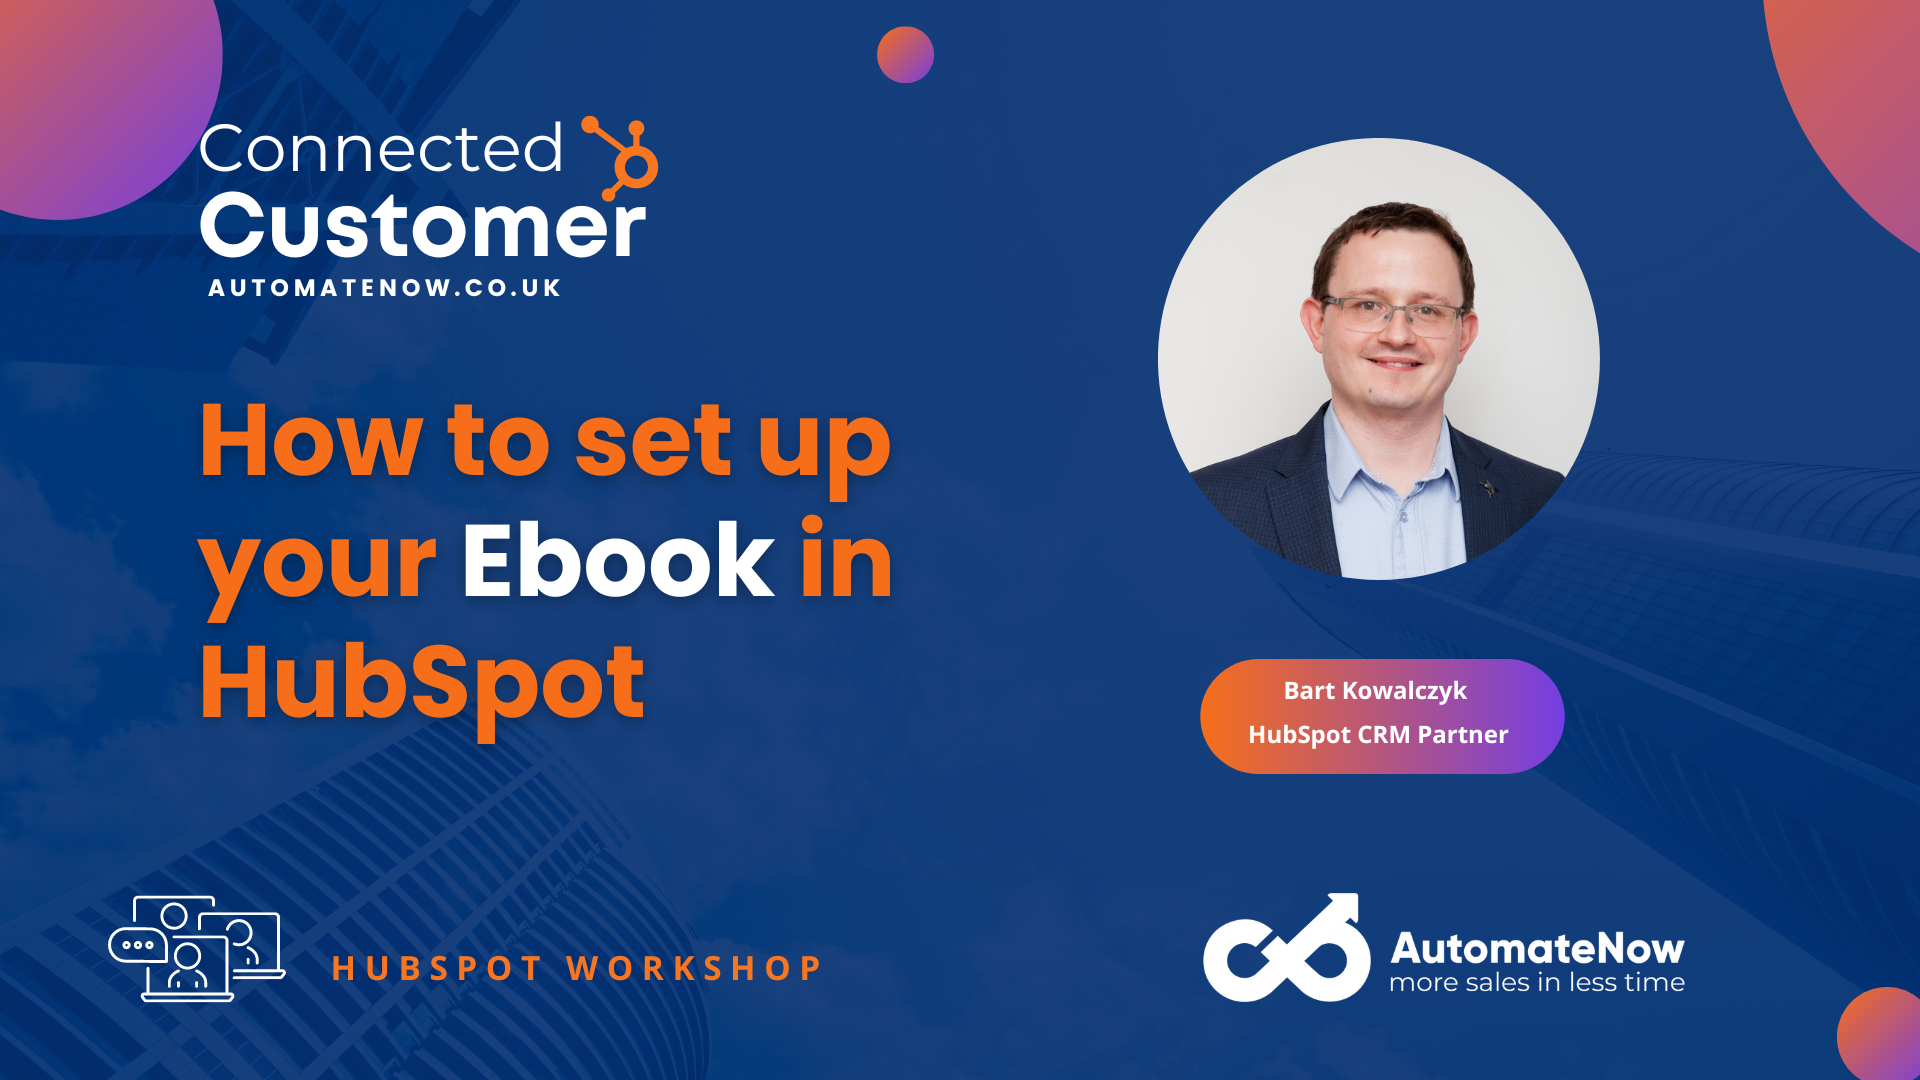 How to set up your e-book in HubSpot 28.02.23